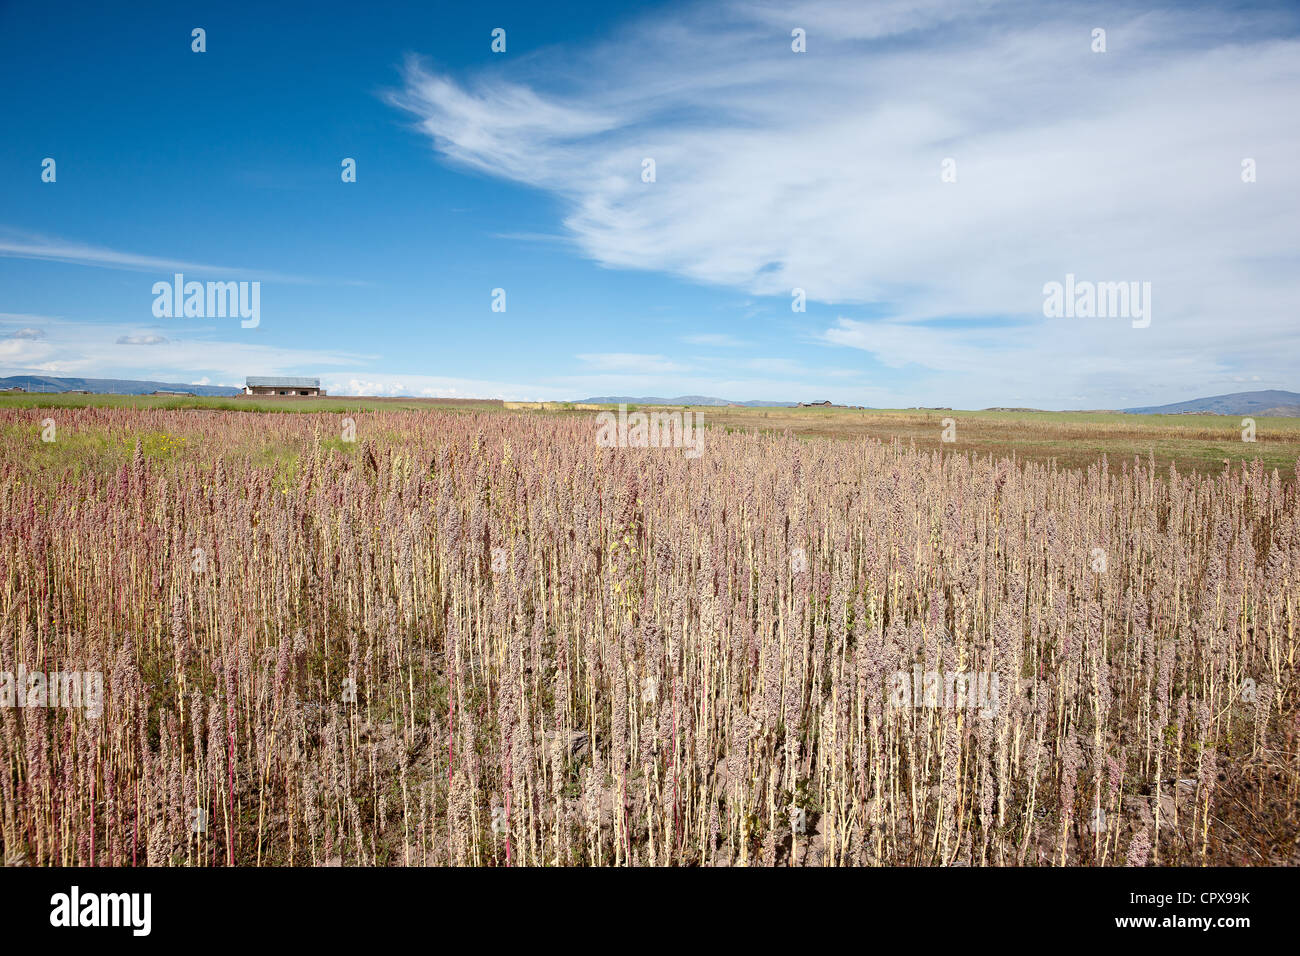 Quinoa field ready for harvest in the Peruvian Andes. Landscape. Stock Photo